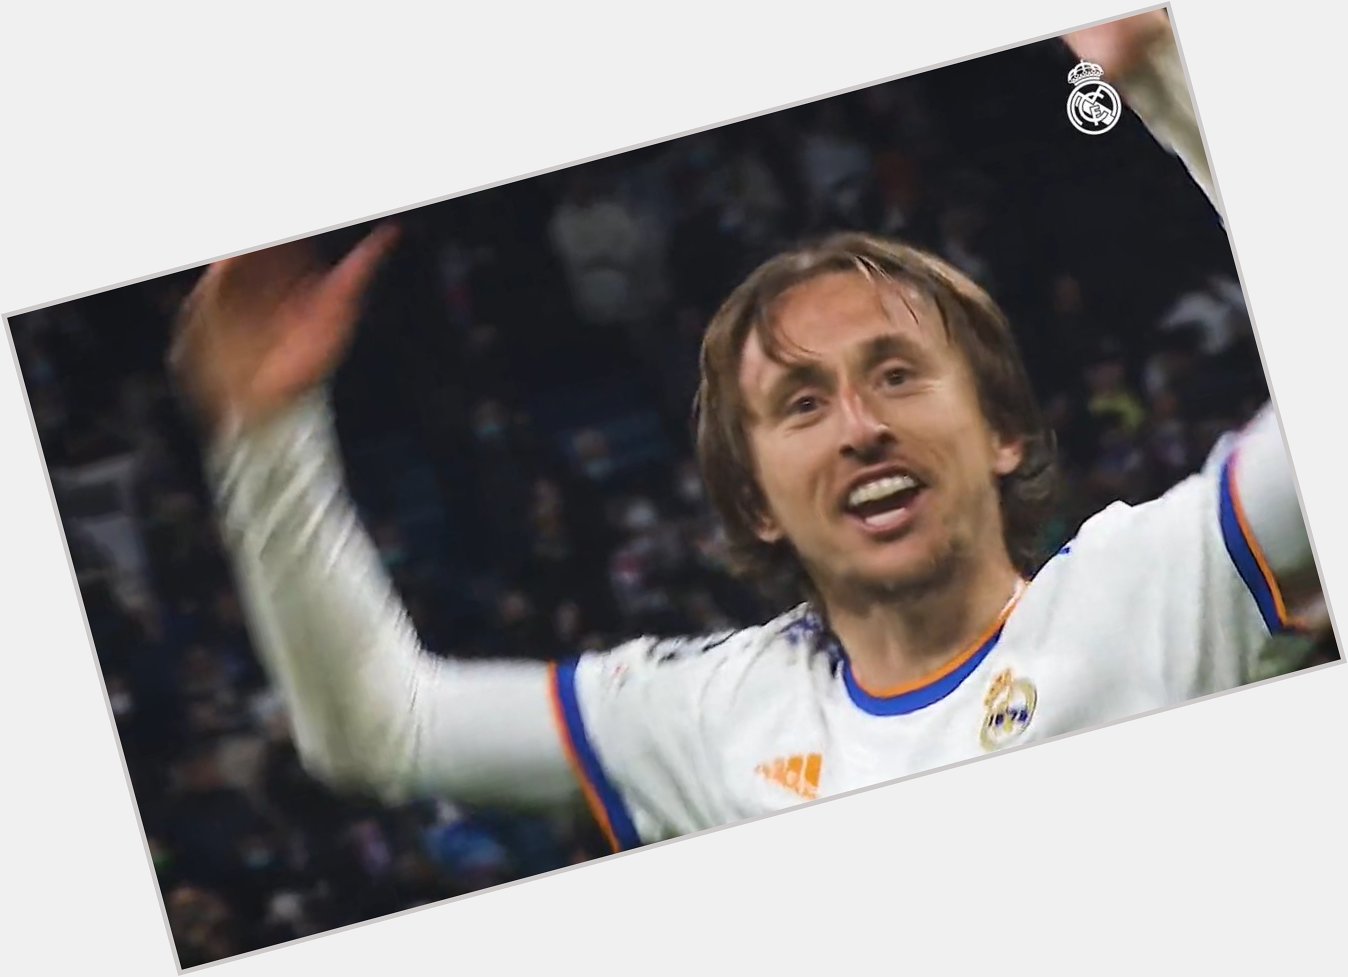 Happy 37th birthday to Luka Modric...still the best youngster itw.
